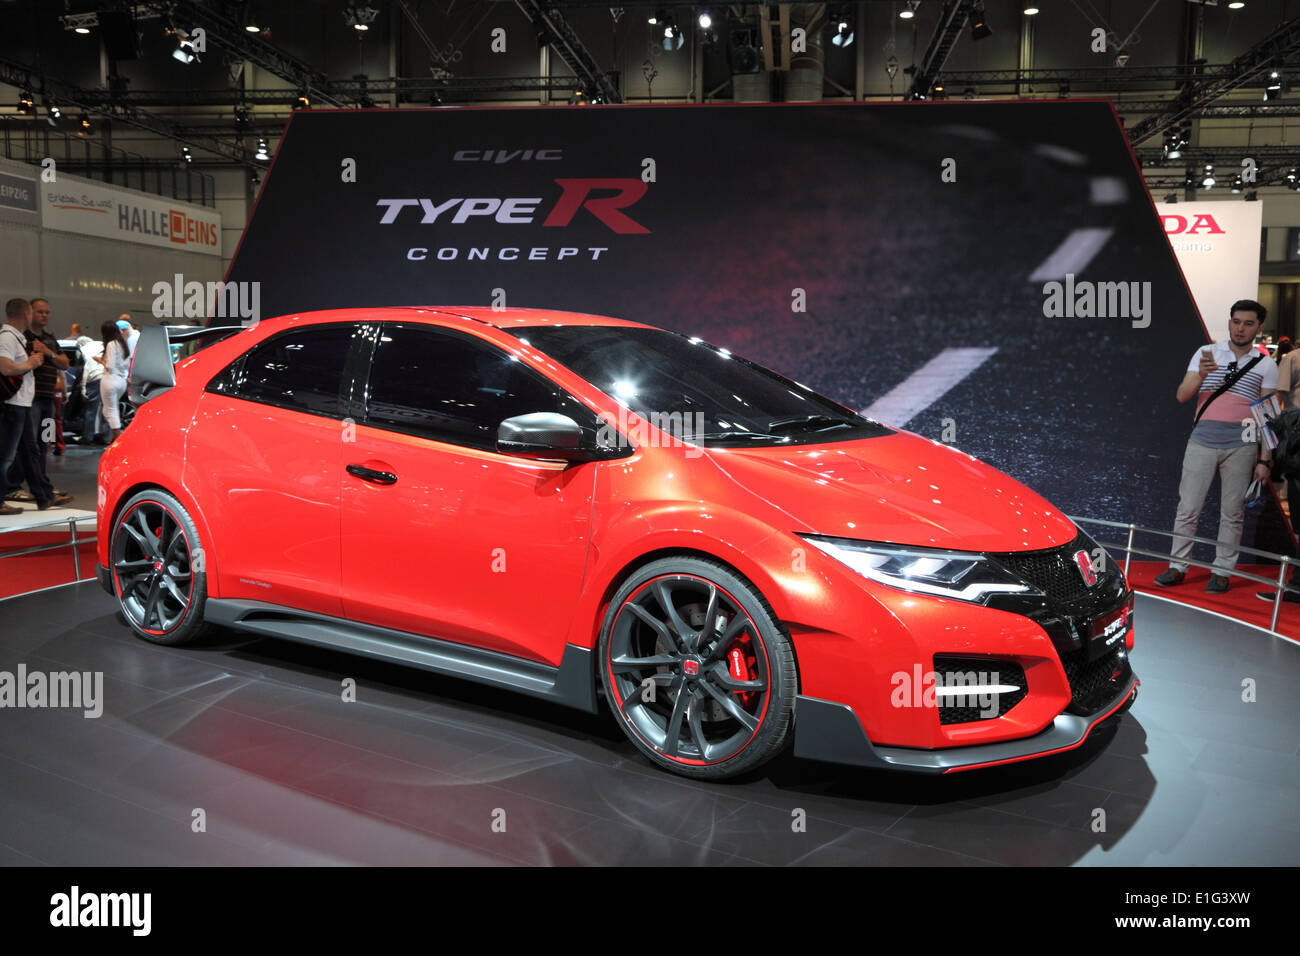 Honda Civic TypeR concept car at the AMI - Auto Mobile International Trade Fair on June 1st, 2014 in Leipzig, Saxony, Germany Stock Photo